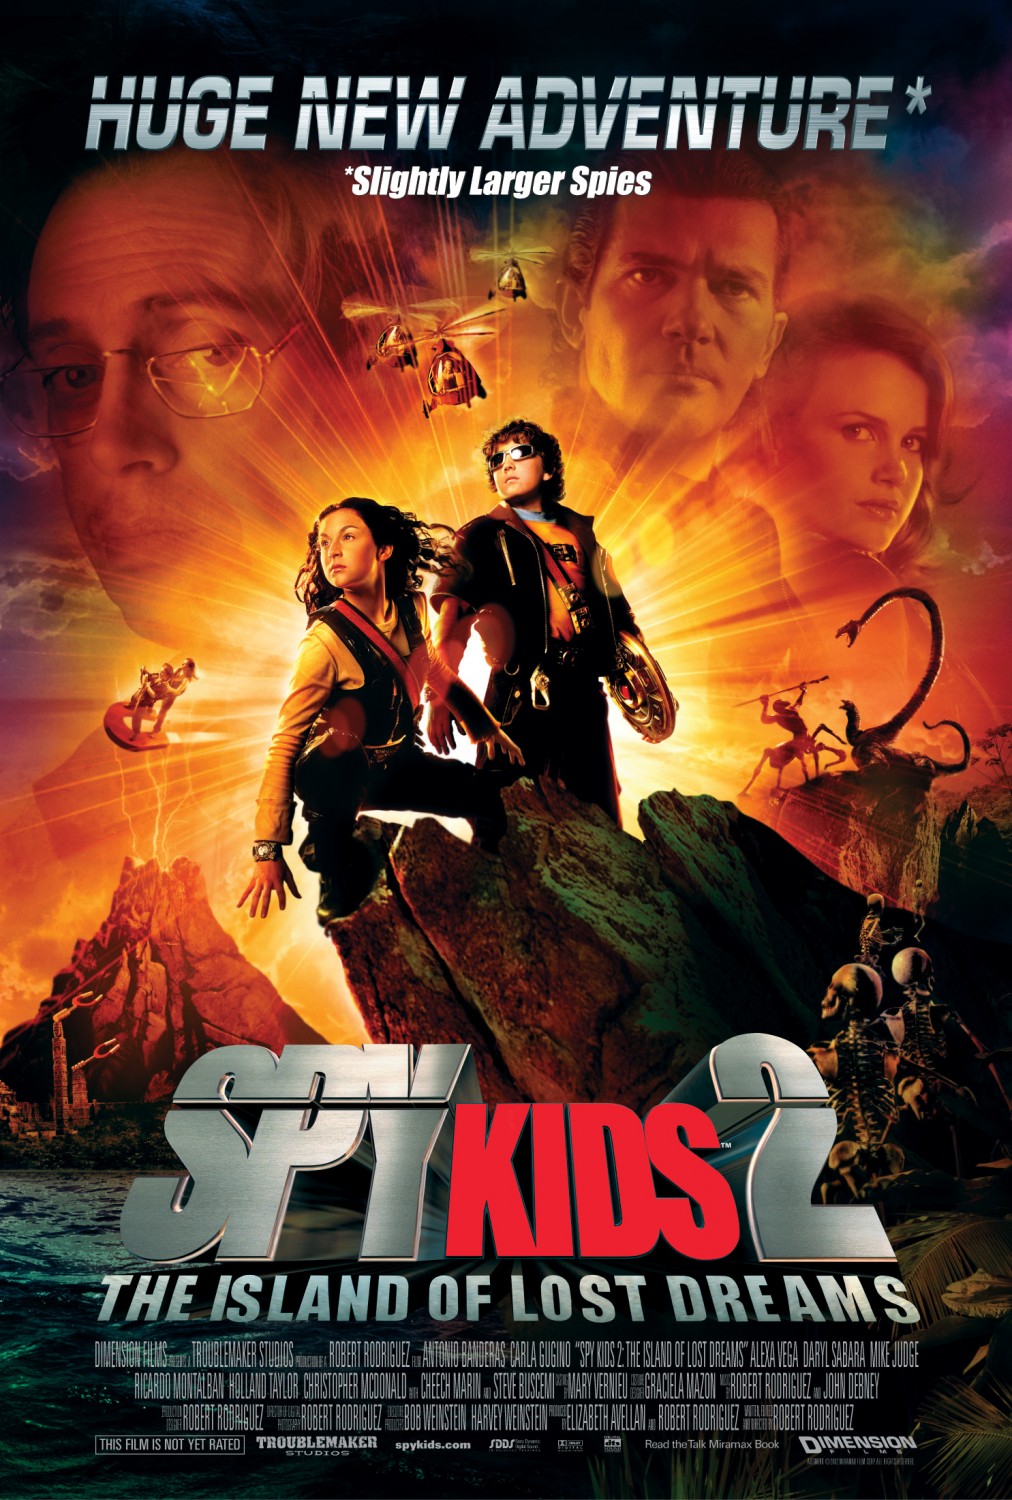 Extra Large Movie Poster Image for Spy Kids 2: The Island of Lost Dreams (#2 of 3)